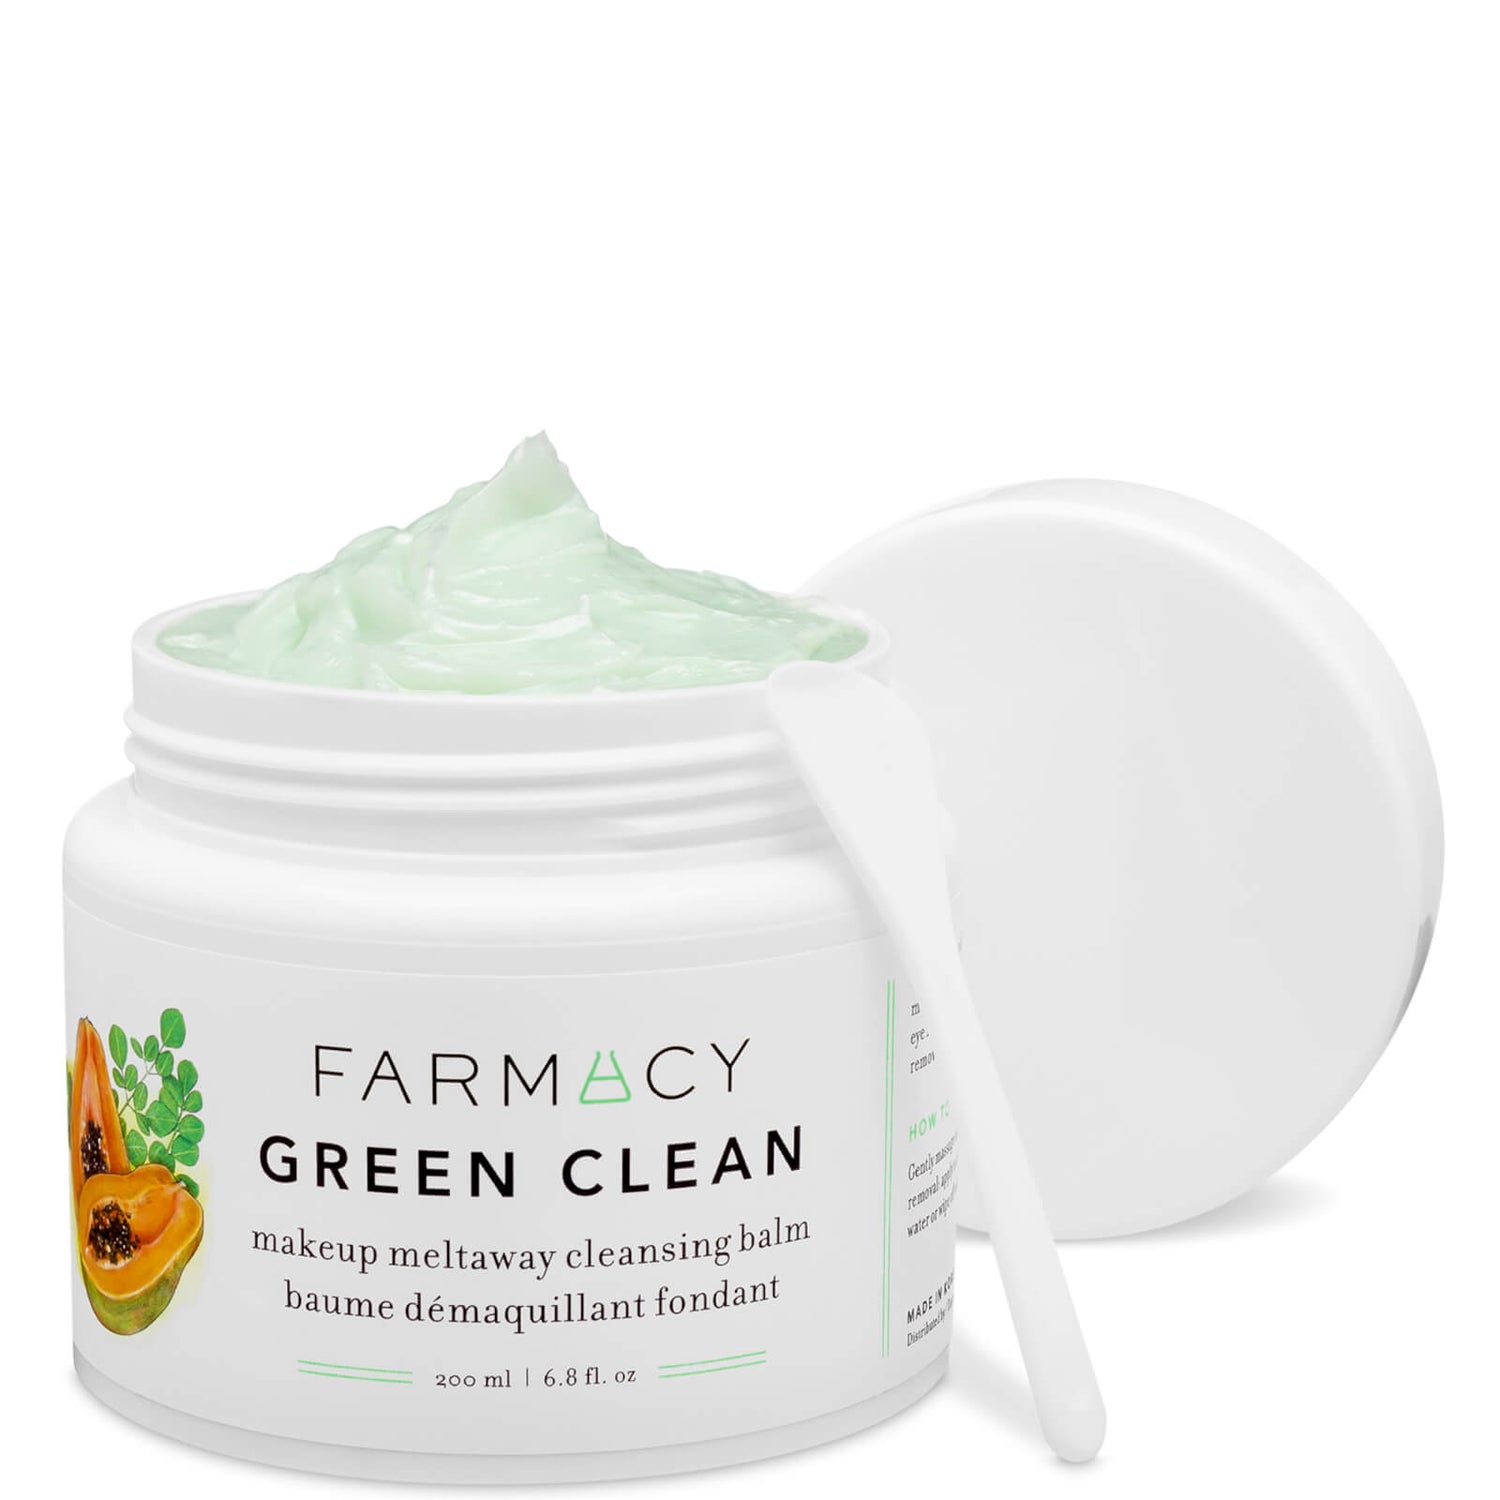 FARMACY GREEN CLEAN Makeup Meltaway Cleansing Balm Supersize 200ml